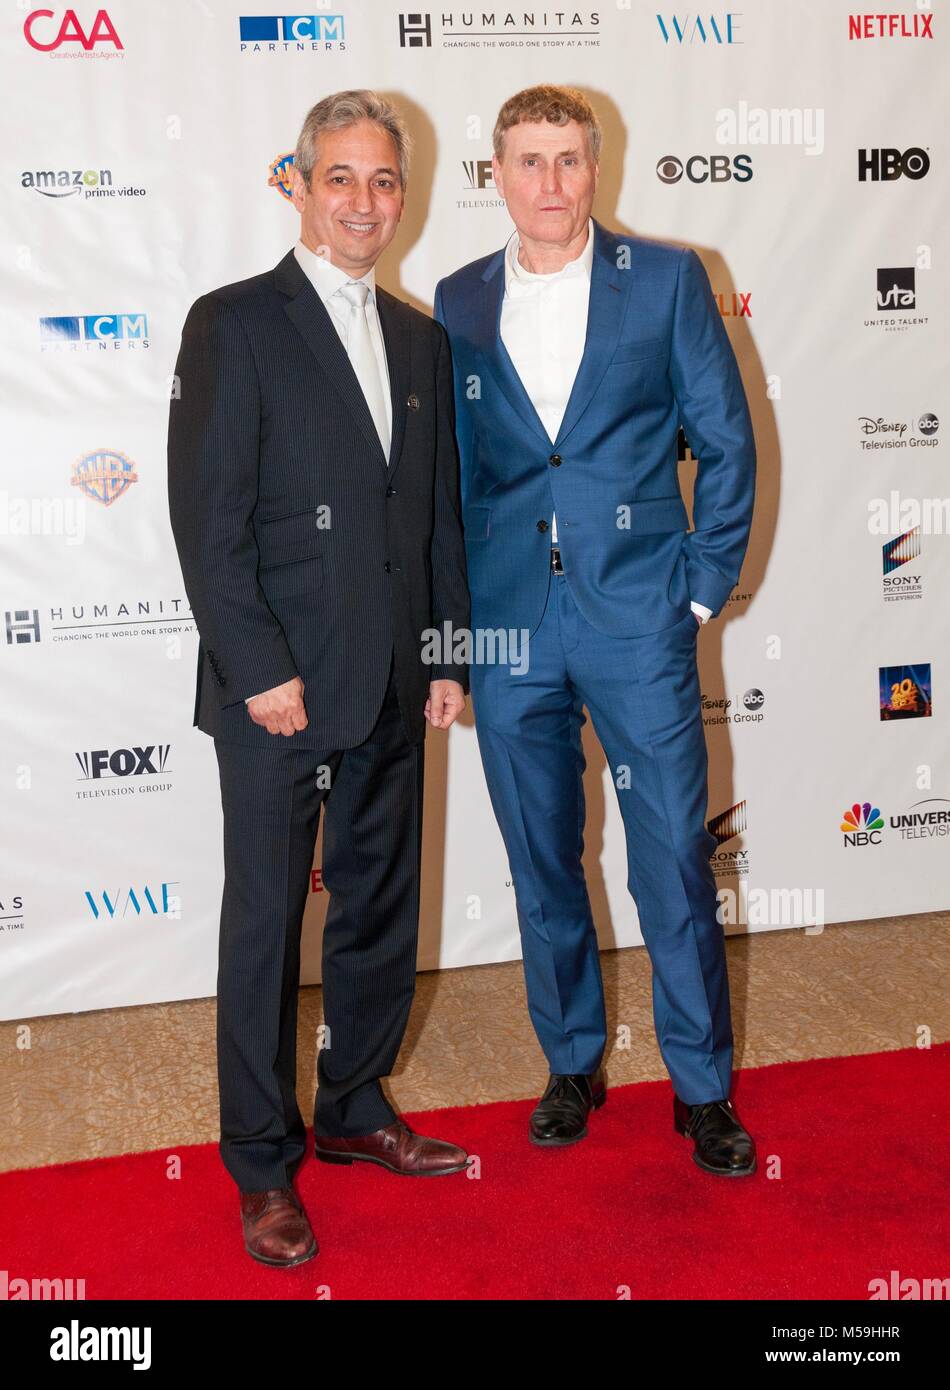 David Shore And Jeff Frost humanitas award 2018, the good doctor, president Sony Pictures Stock Photo